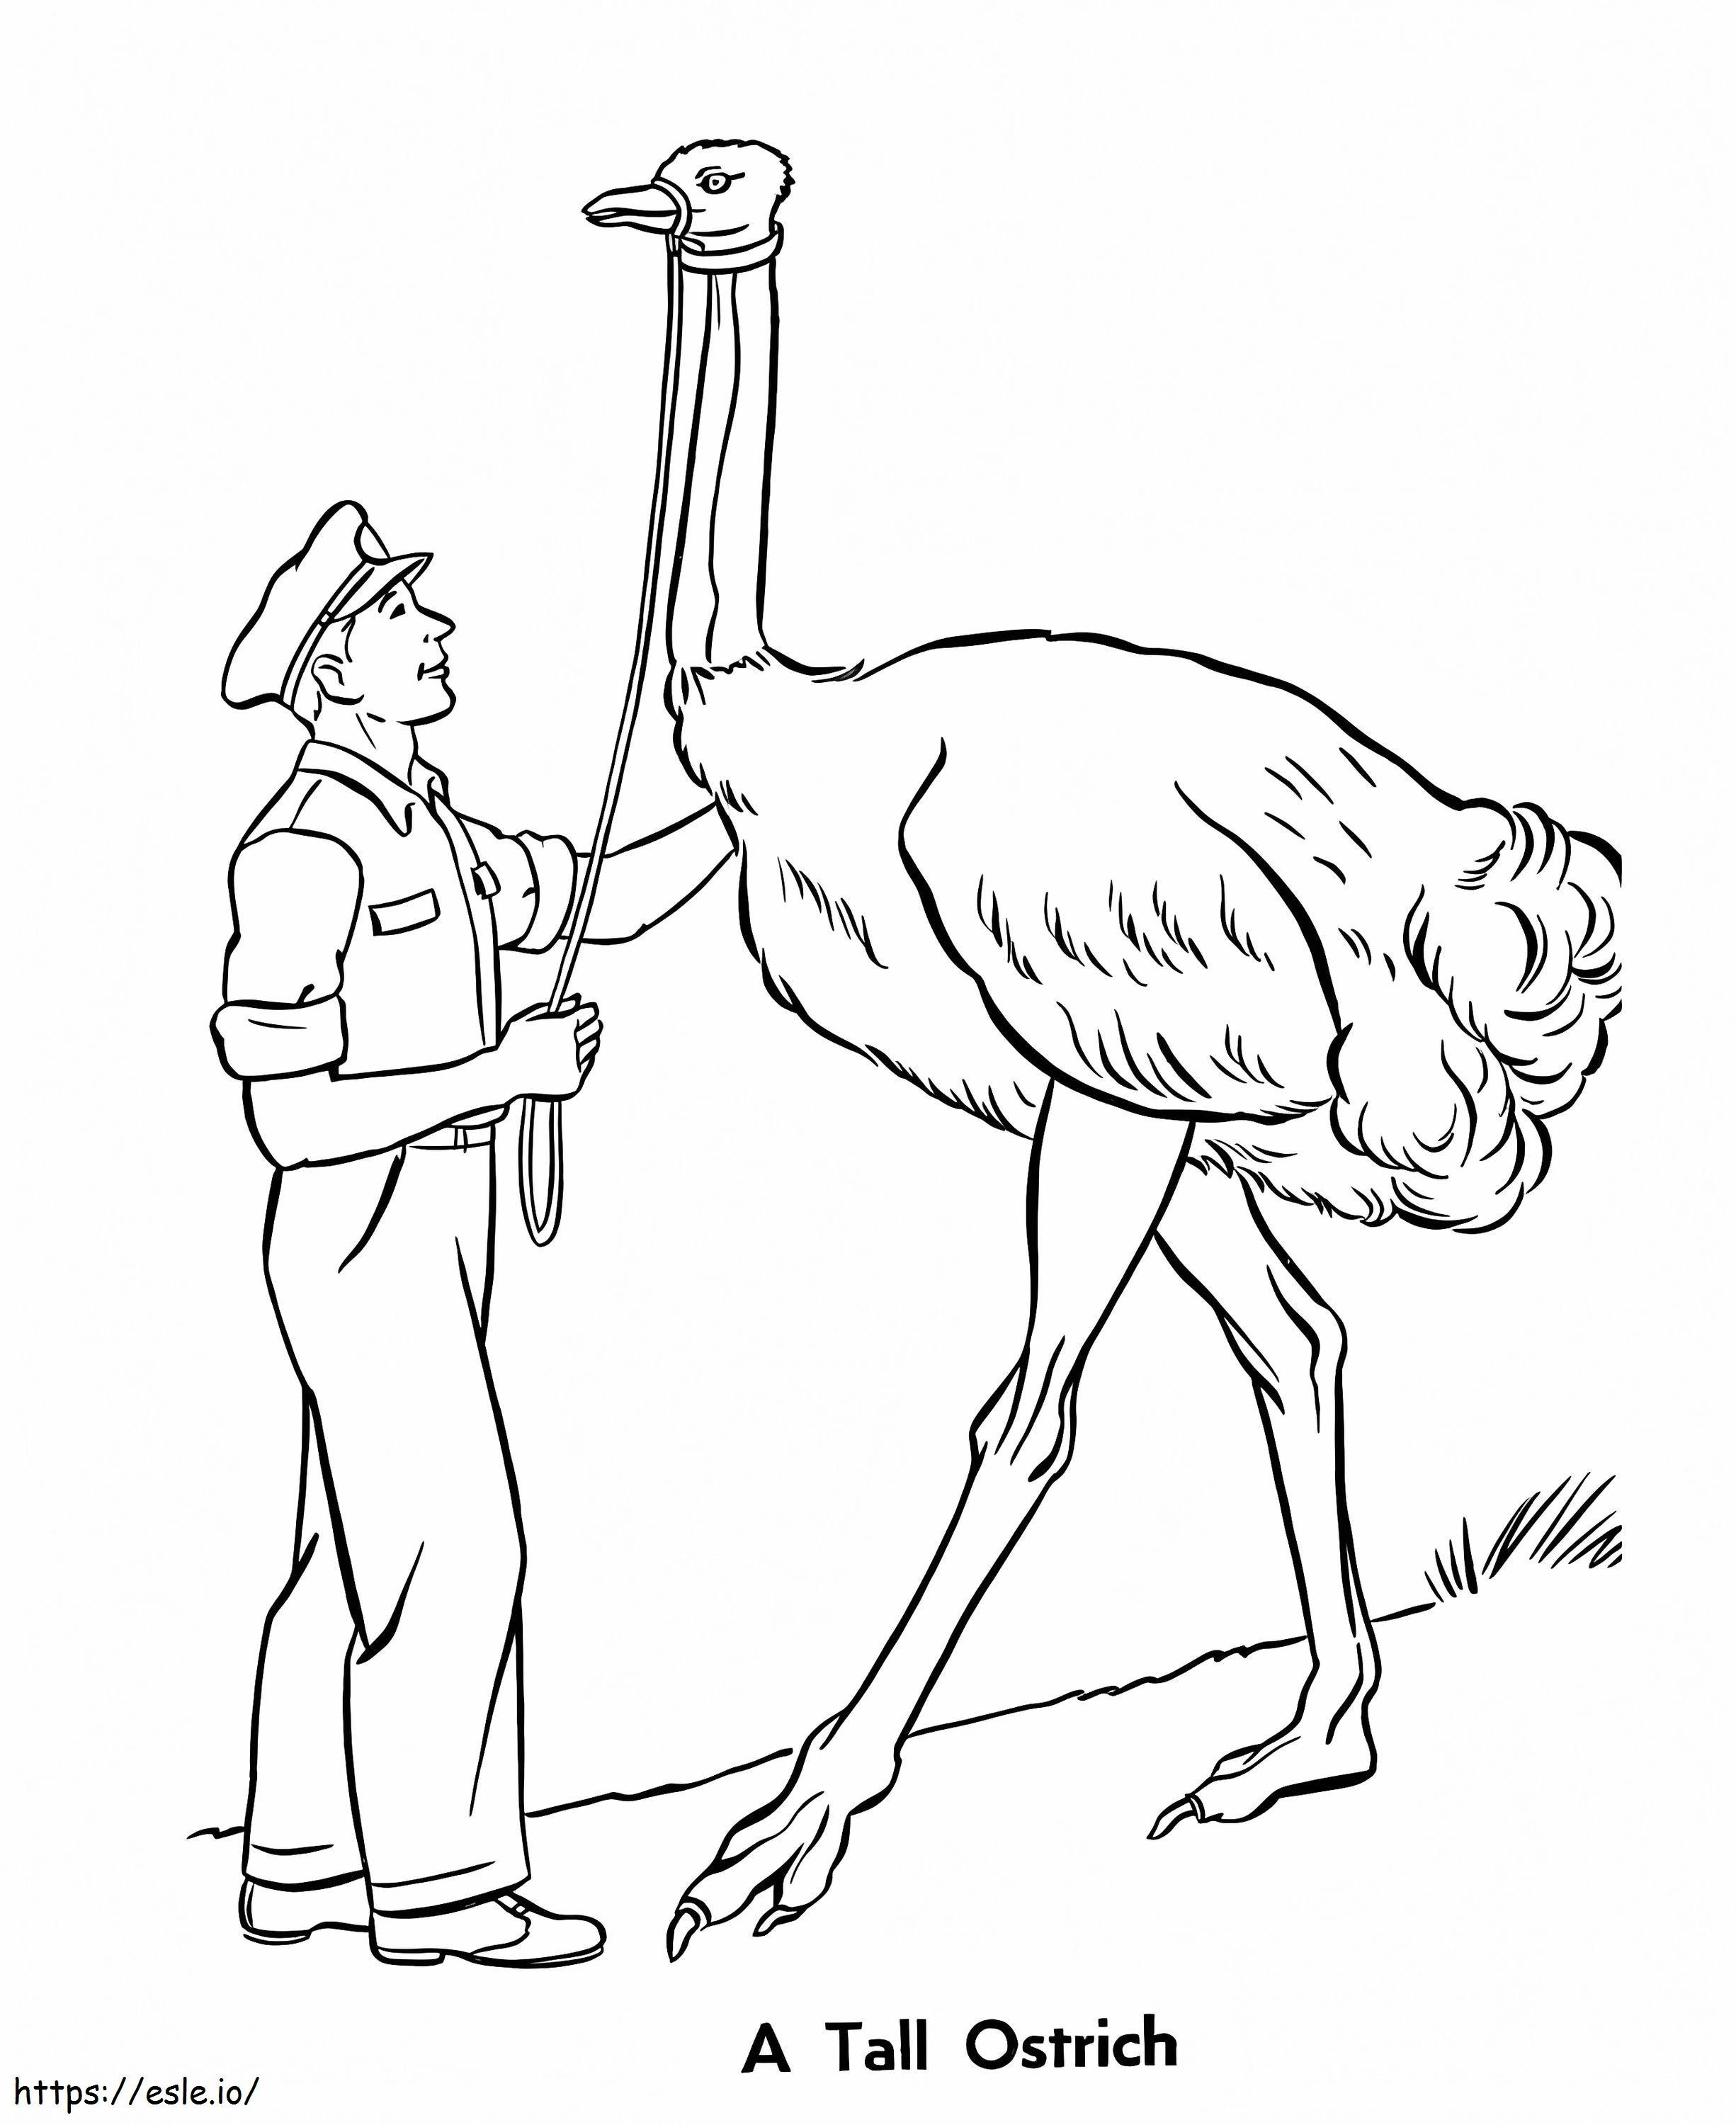 Tall Ostrich coloring page